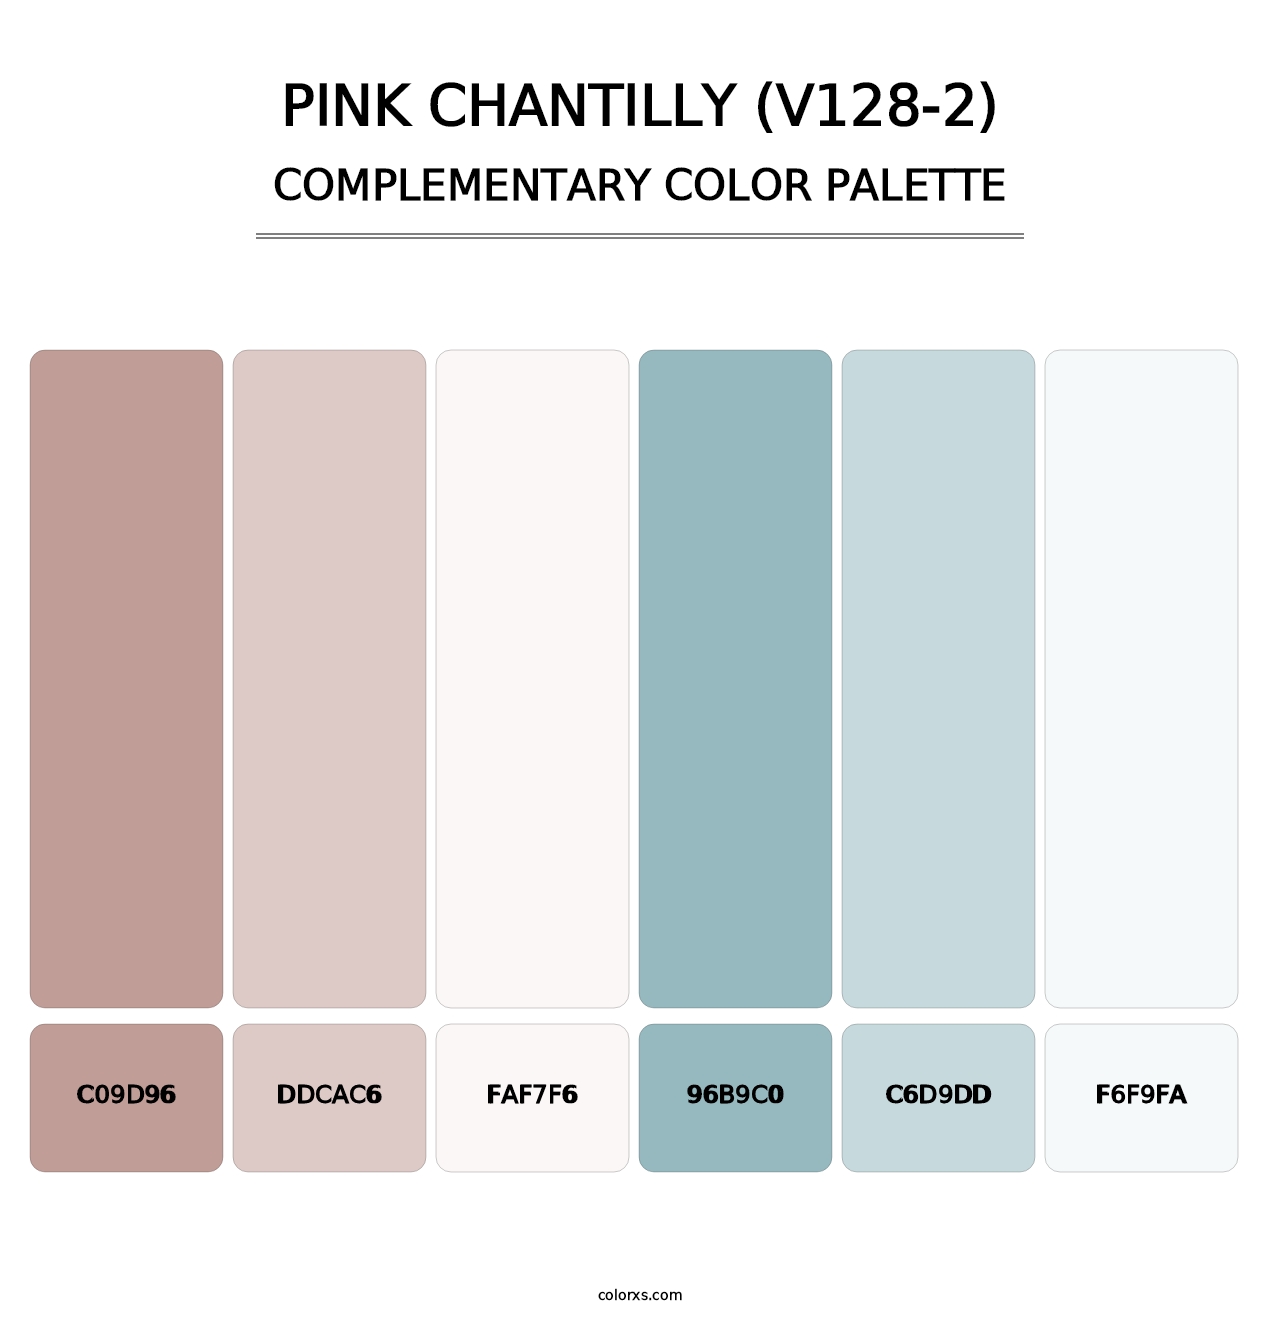 Pink Chantilly (V128-2) - Complementary Color Palette